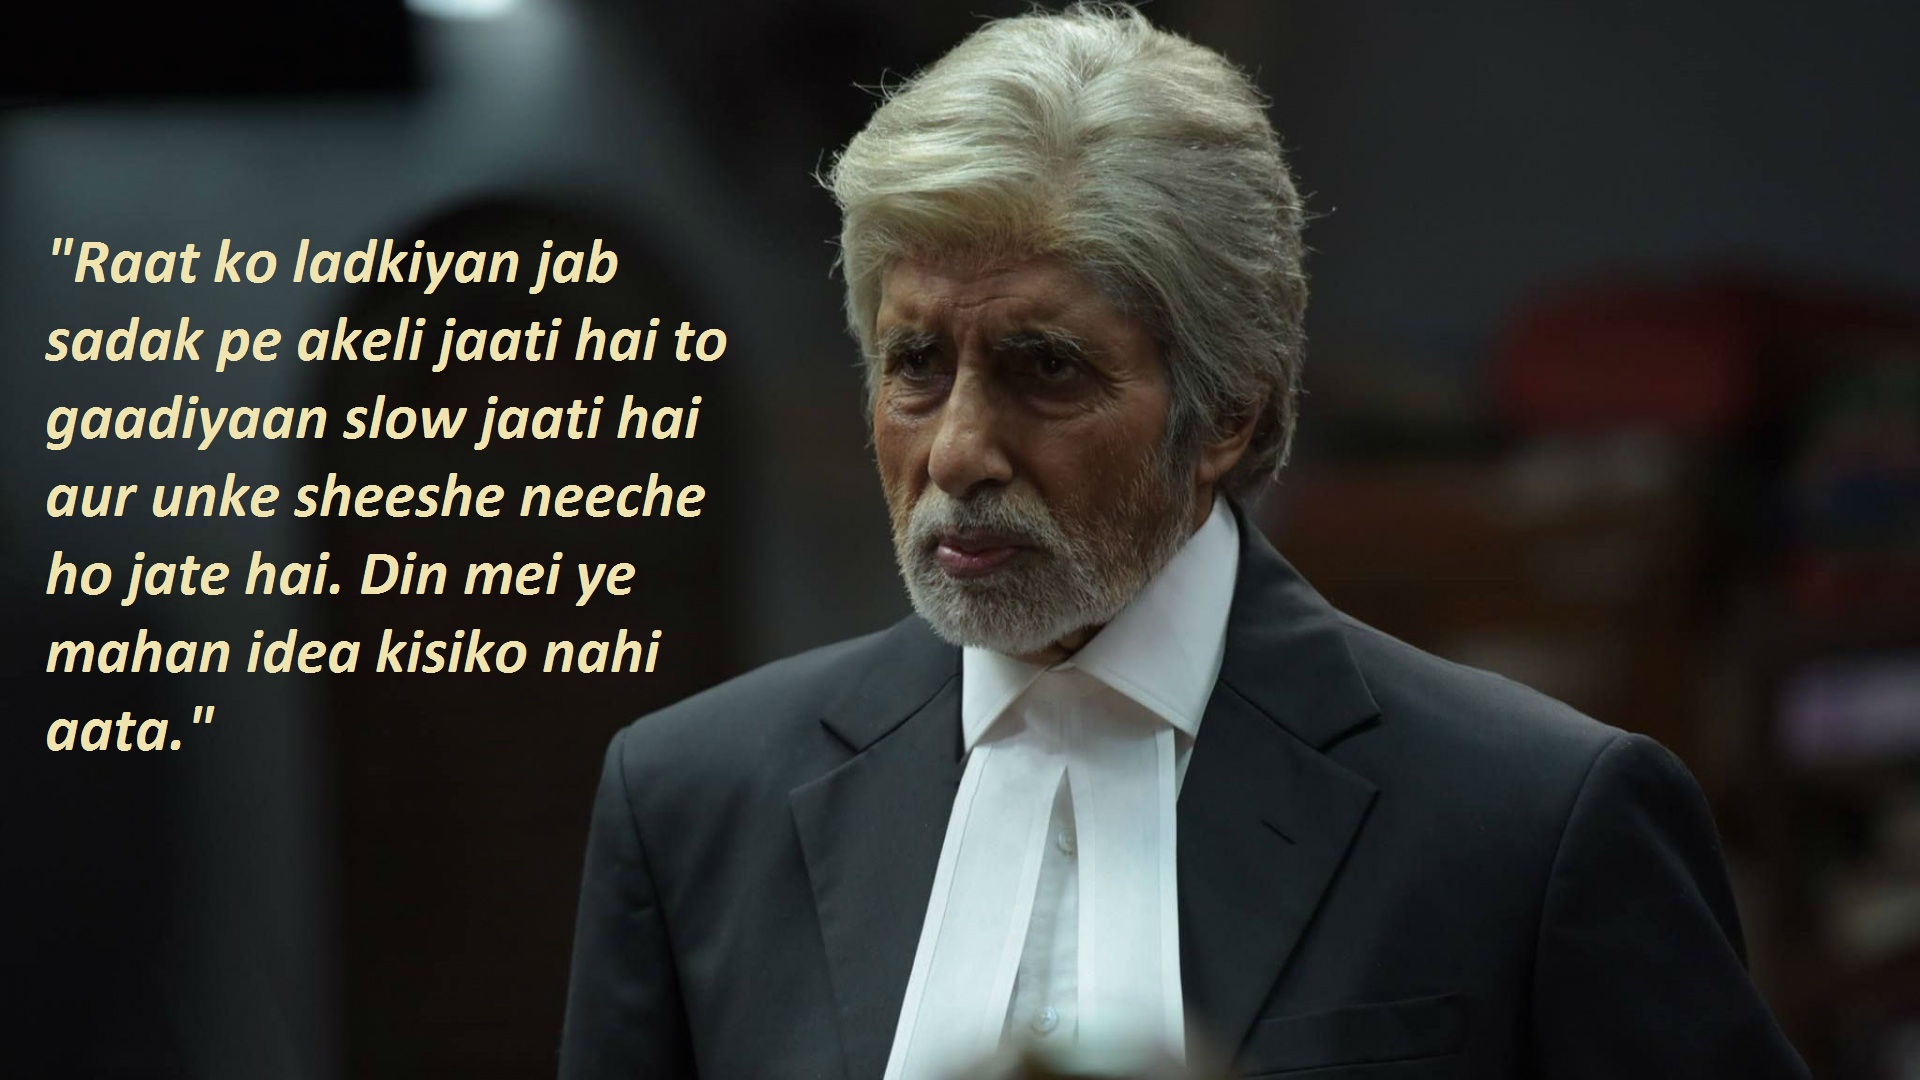 3. Best Dialogues From PINK Movie